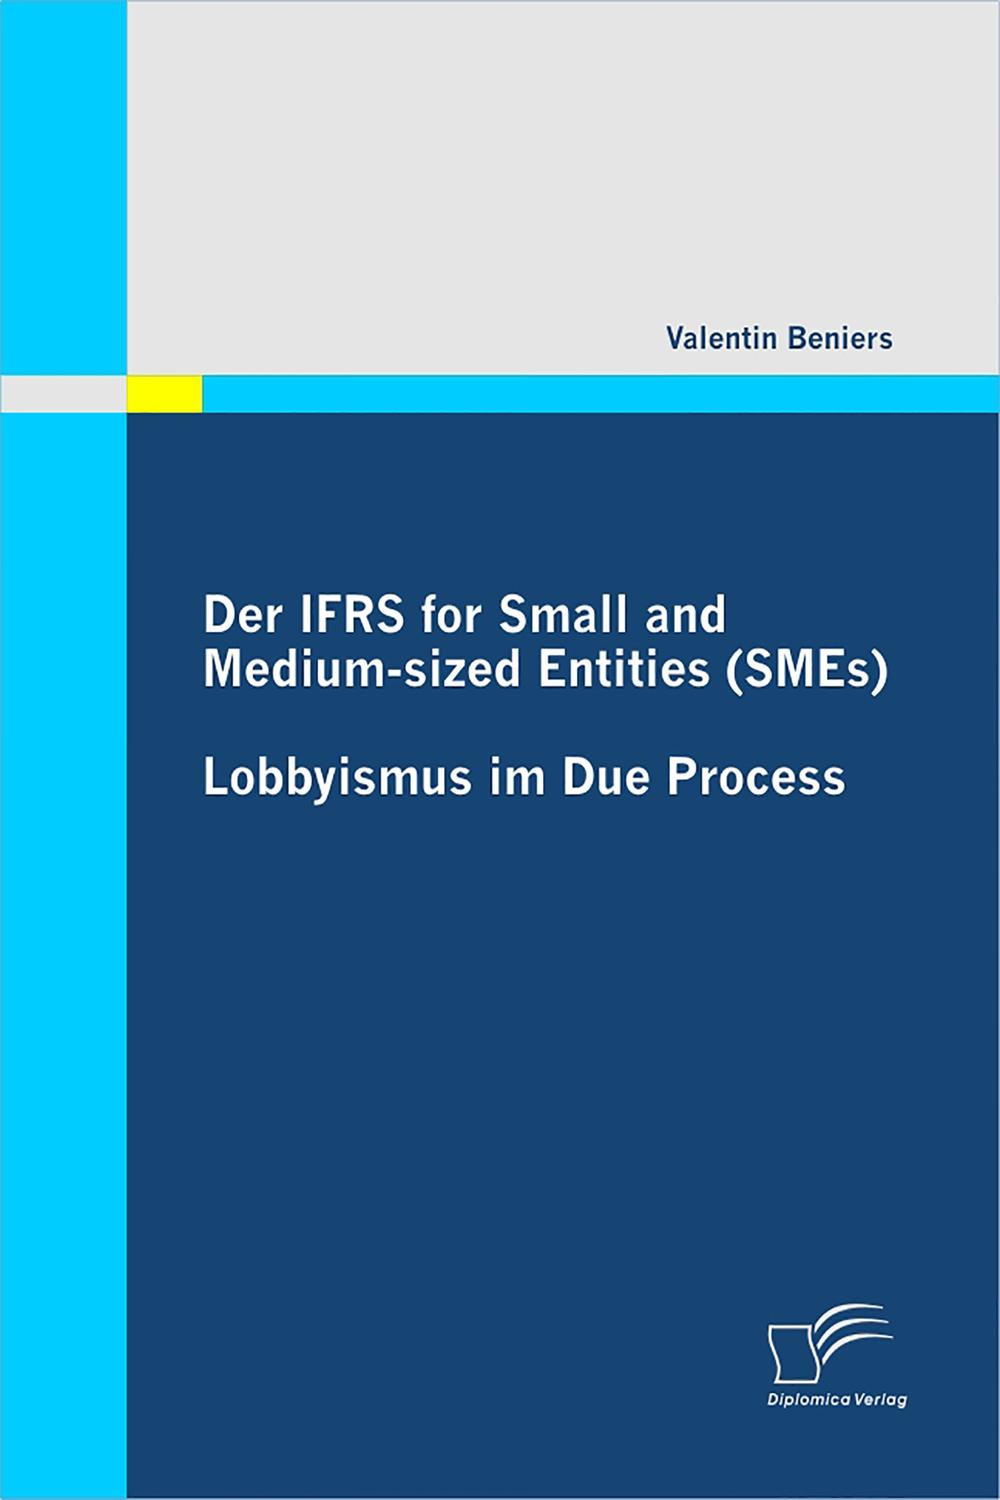 Der IFRS for Small and Medium-sized Entities (SMEs): Lobbyismus im Due Process - Valentin Beniers,,